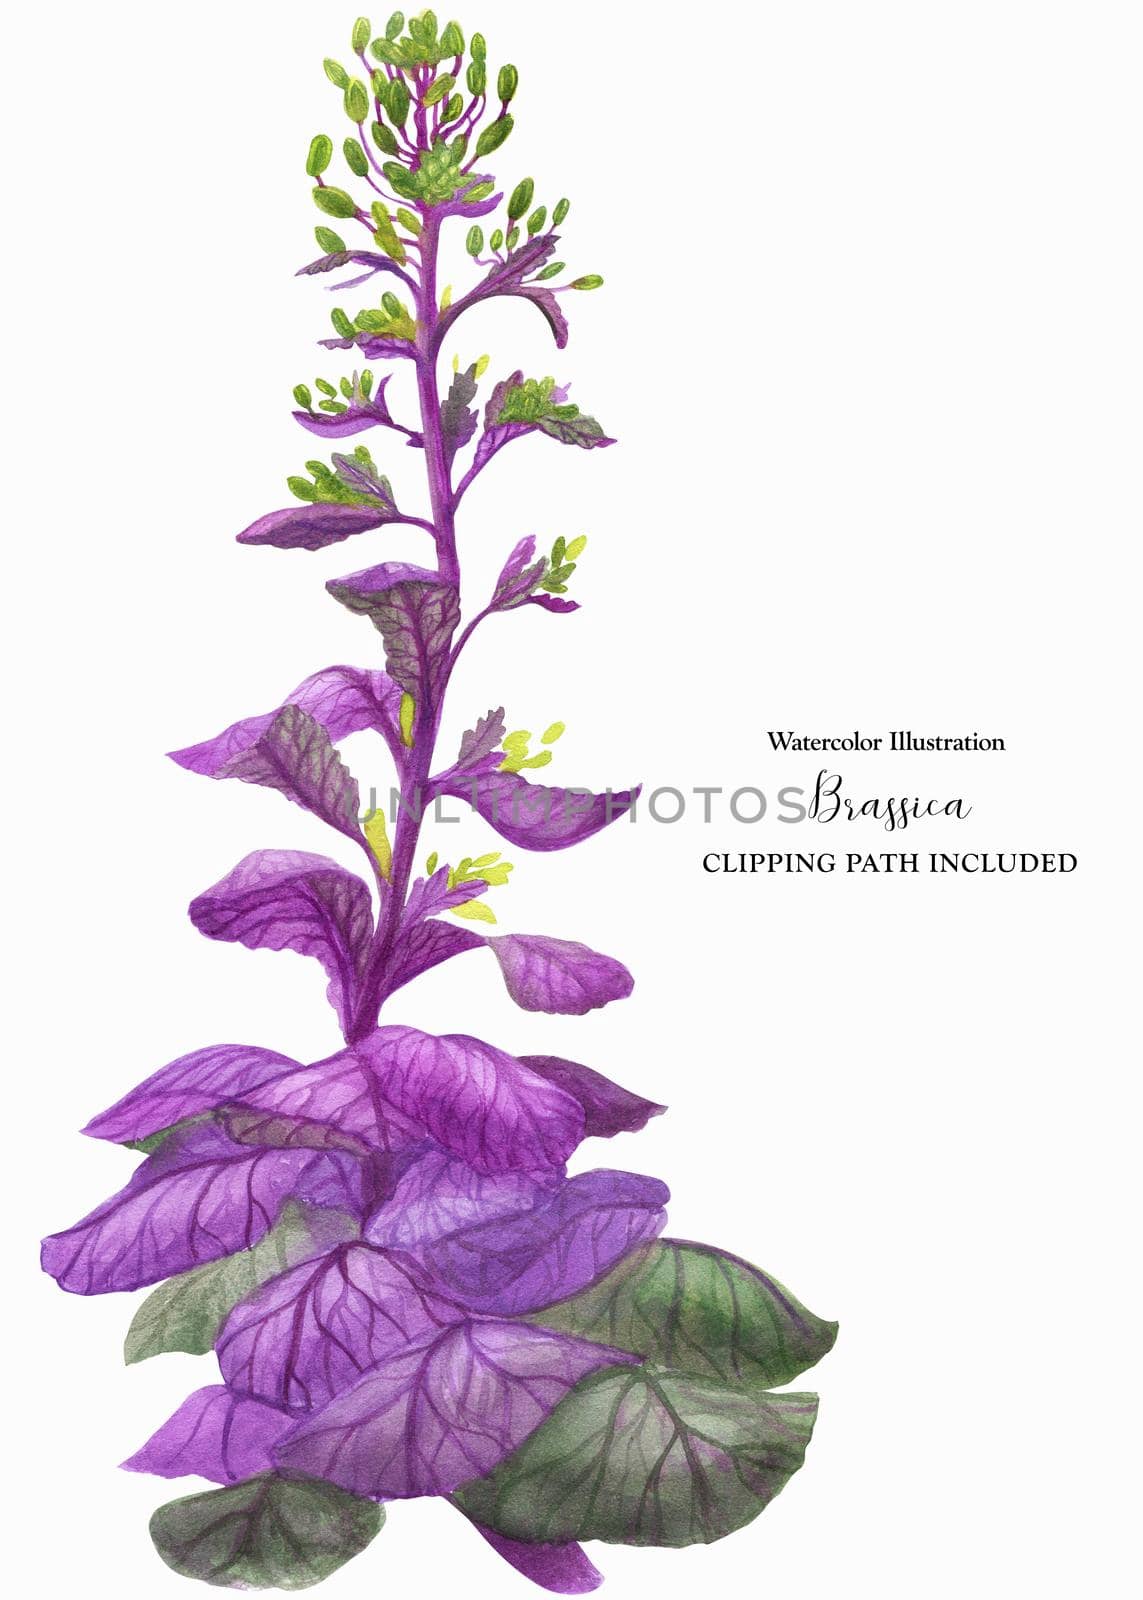 Violet wild cabbage Brassica, botanical watercolor illustration with clipping path